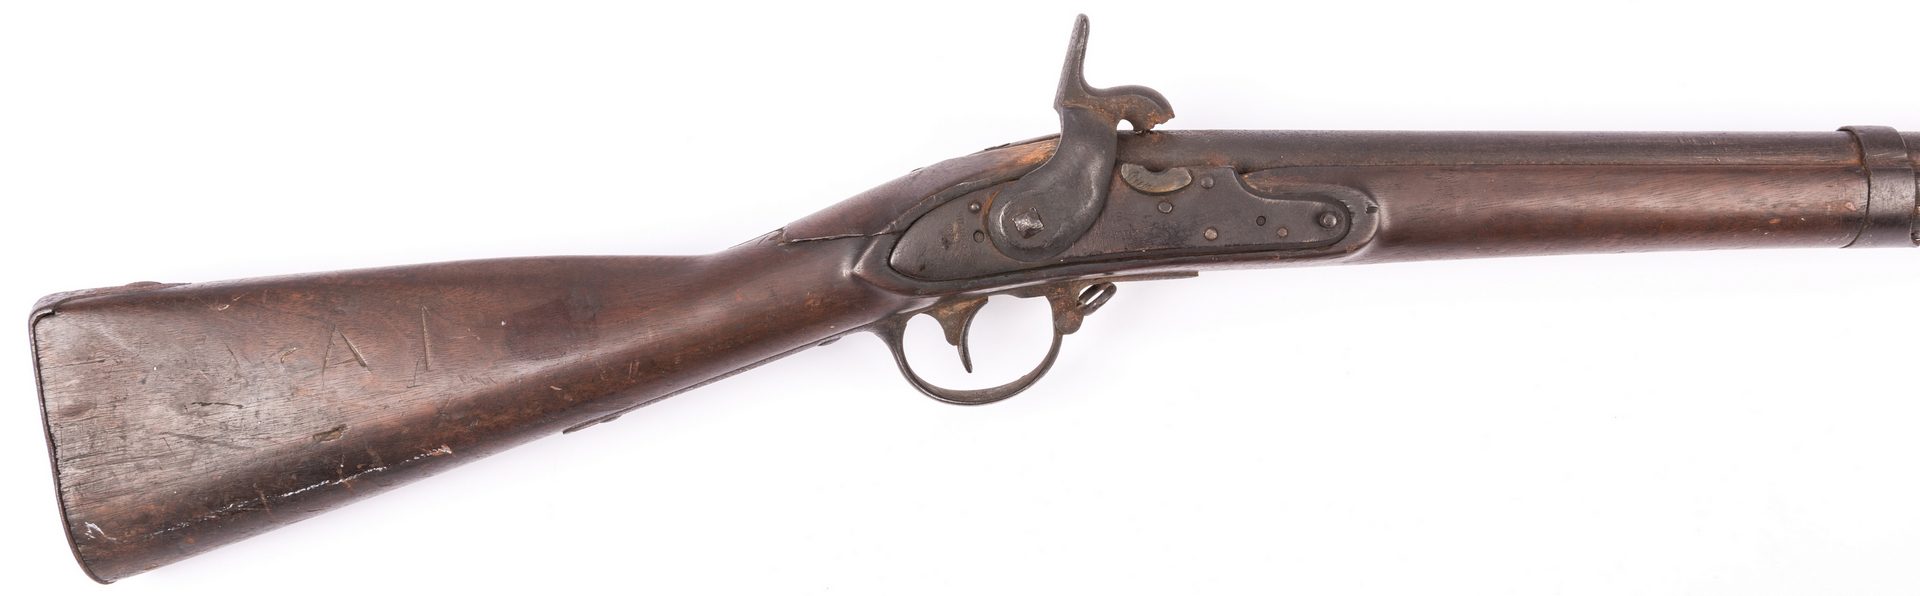 Lot 504: U.S. Asa Waters Contract Musket, 1829